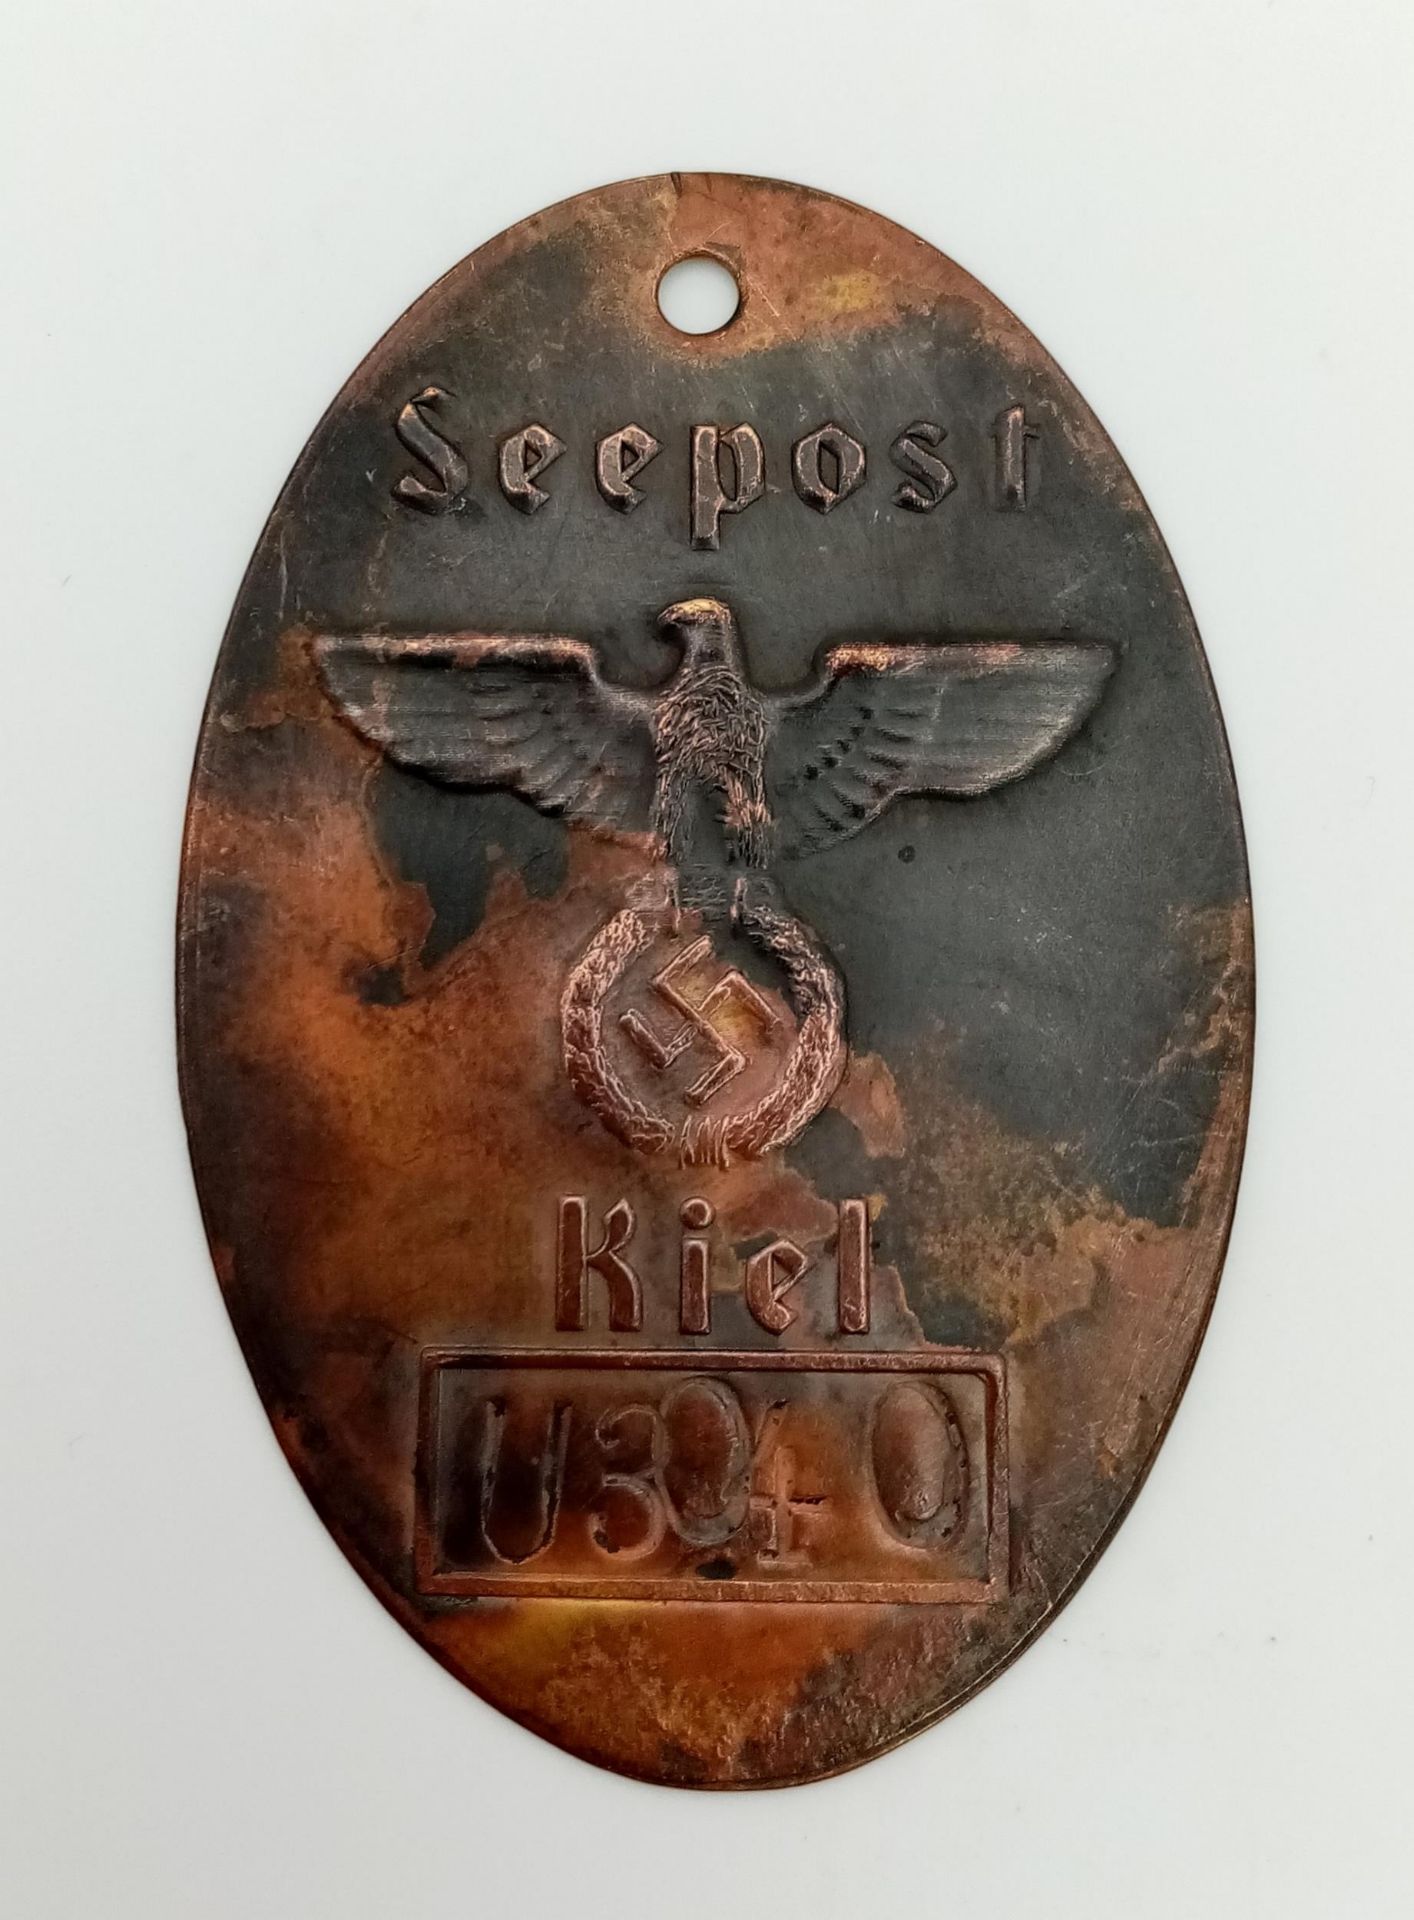 WW2 German Kriegsmarine Mail Sack Tag for the U-3040. The U-3040 was scuttled in Kiel on the 3rd May